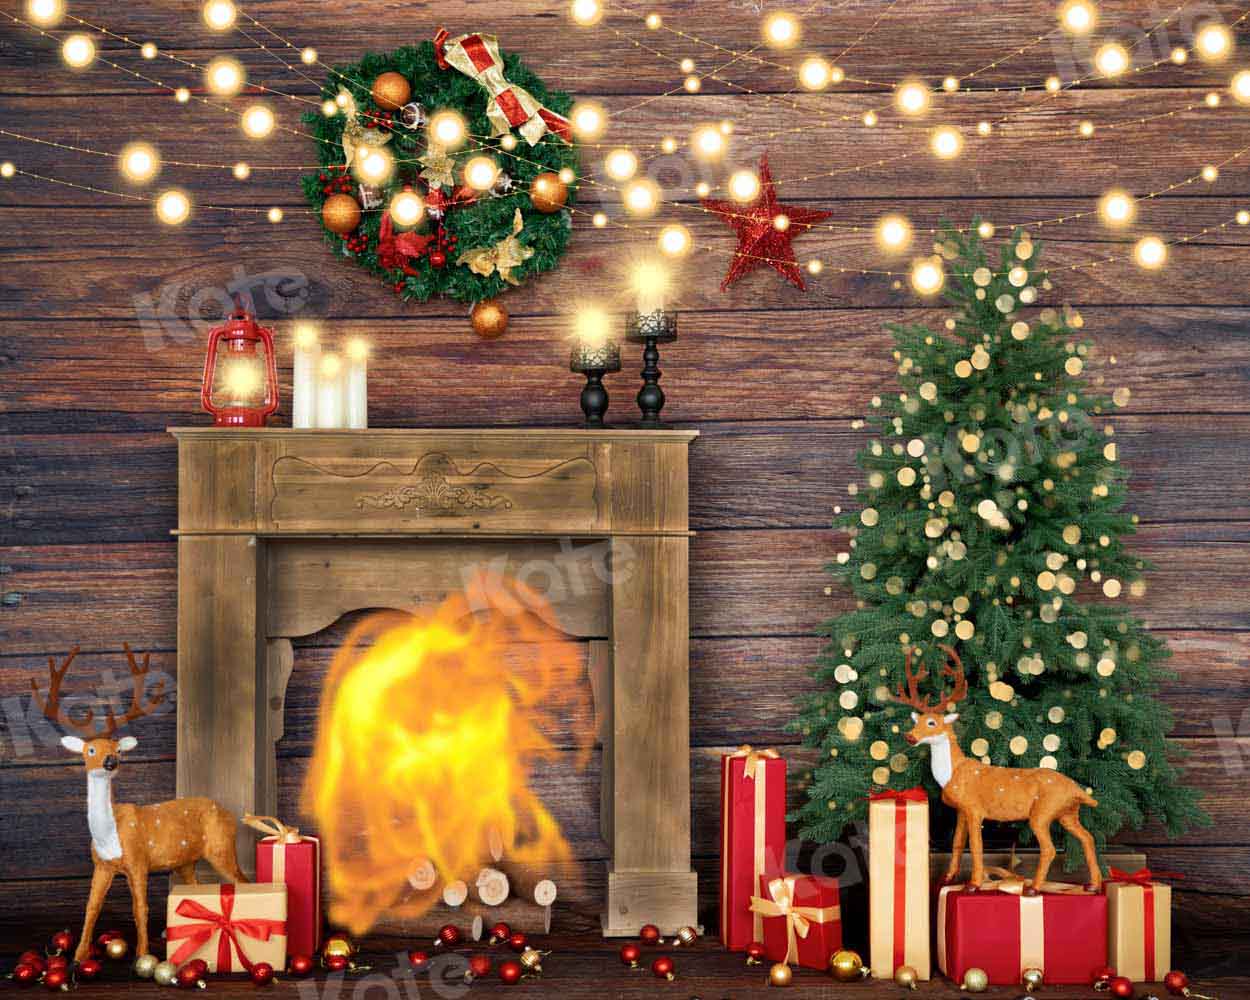 Kate Christmas Party Wooden Fireplace Room Backdrop Designed by Emetselch